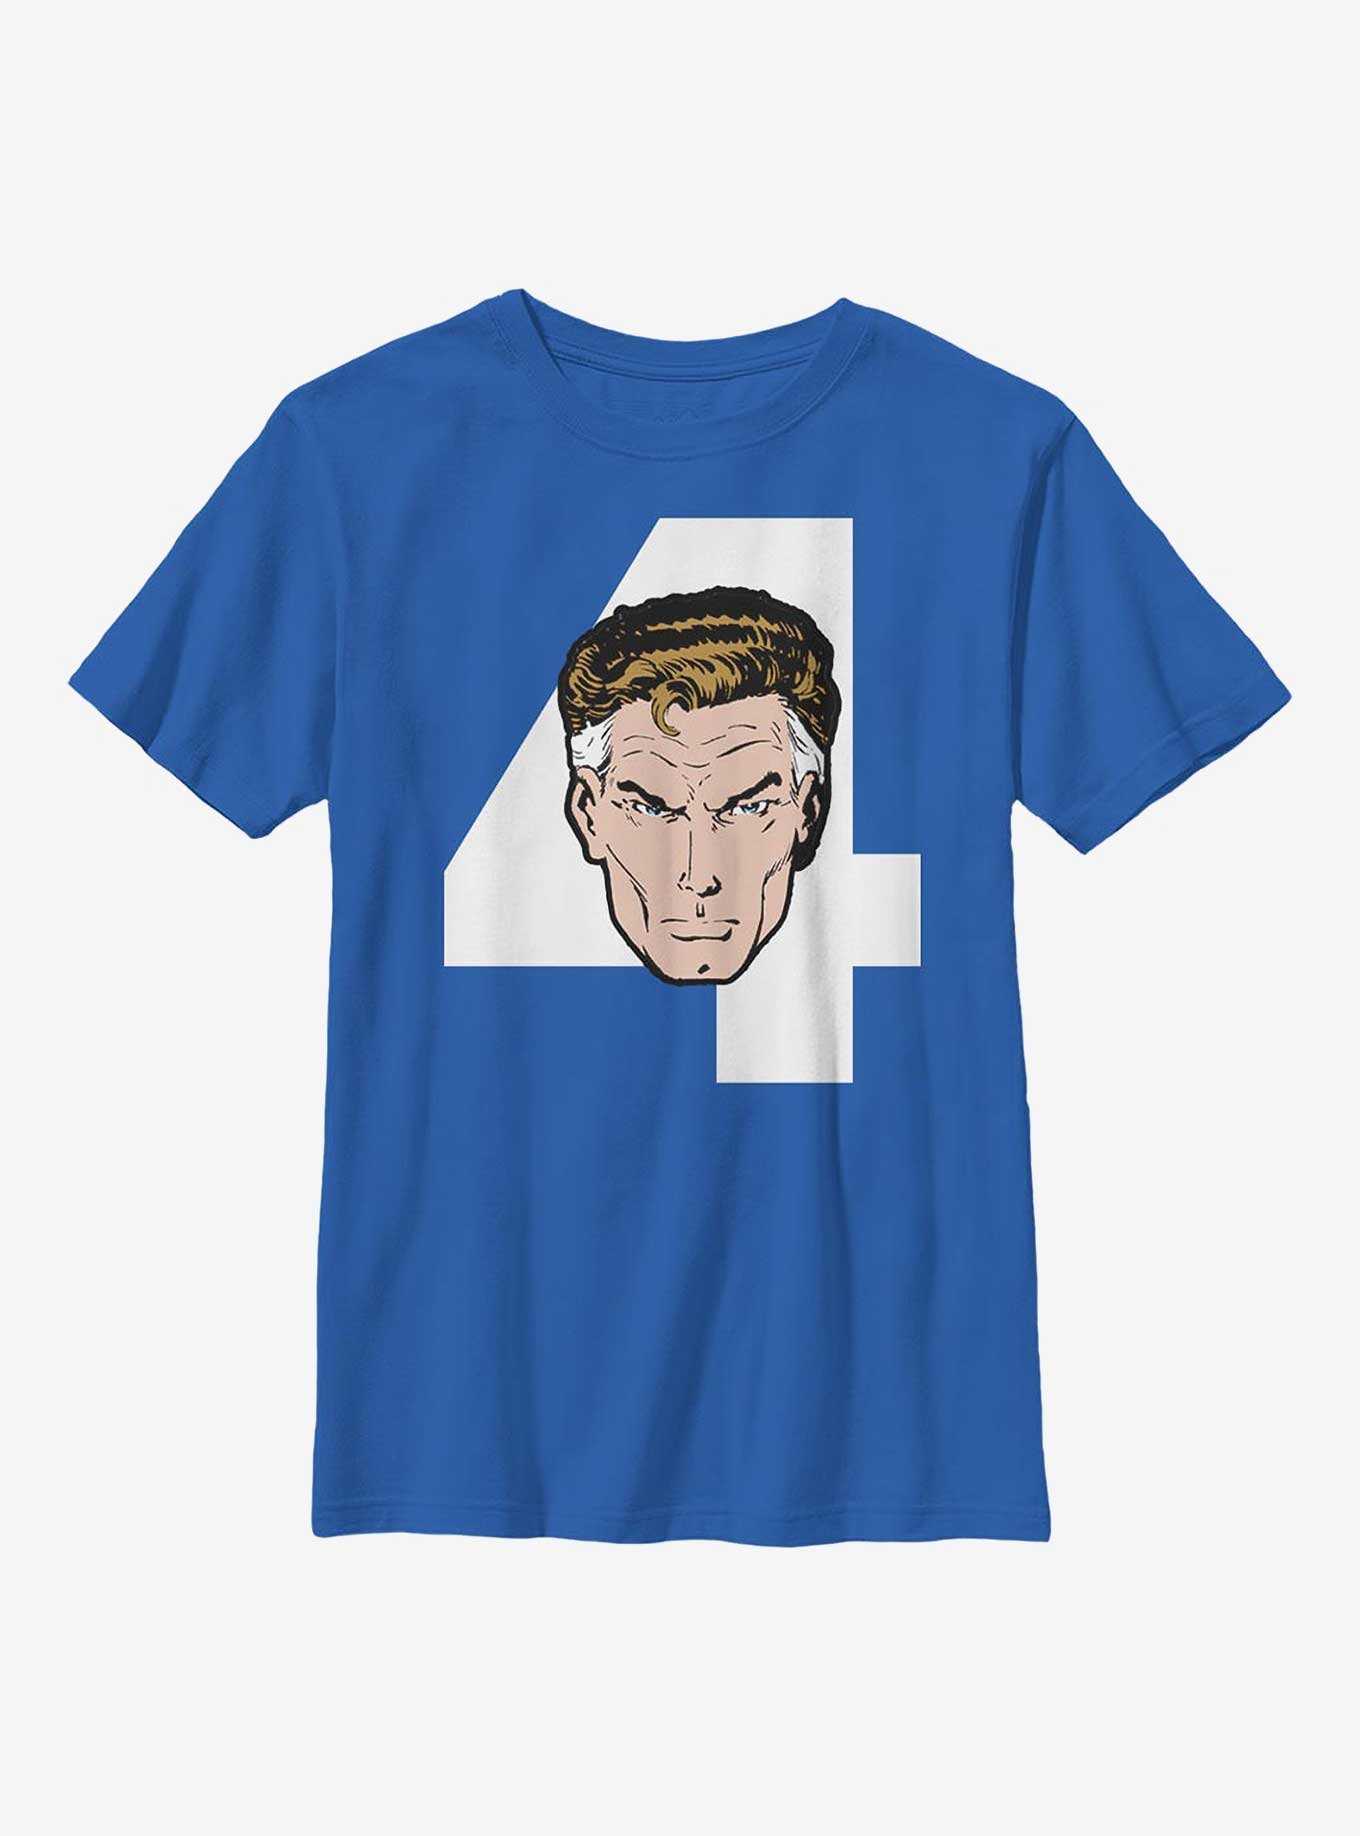 Shirts Gifts Fantastic Four | Merch and OFFICIAL BoxLunch